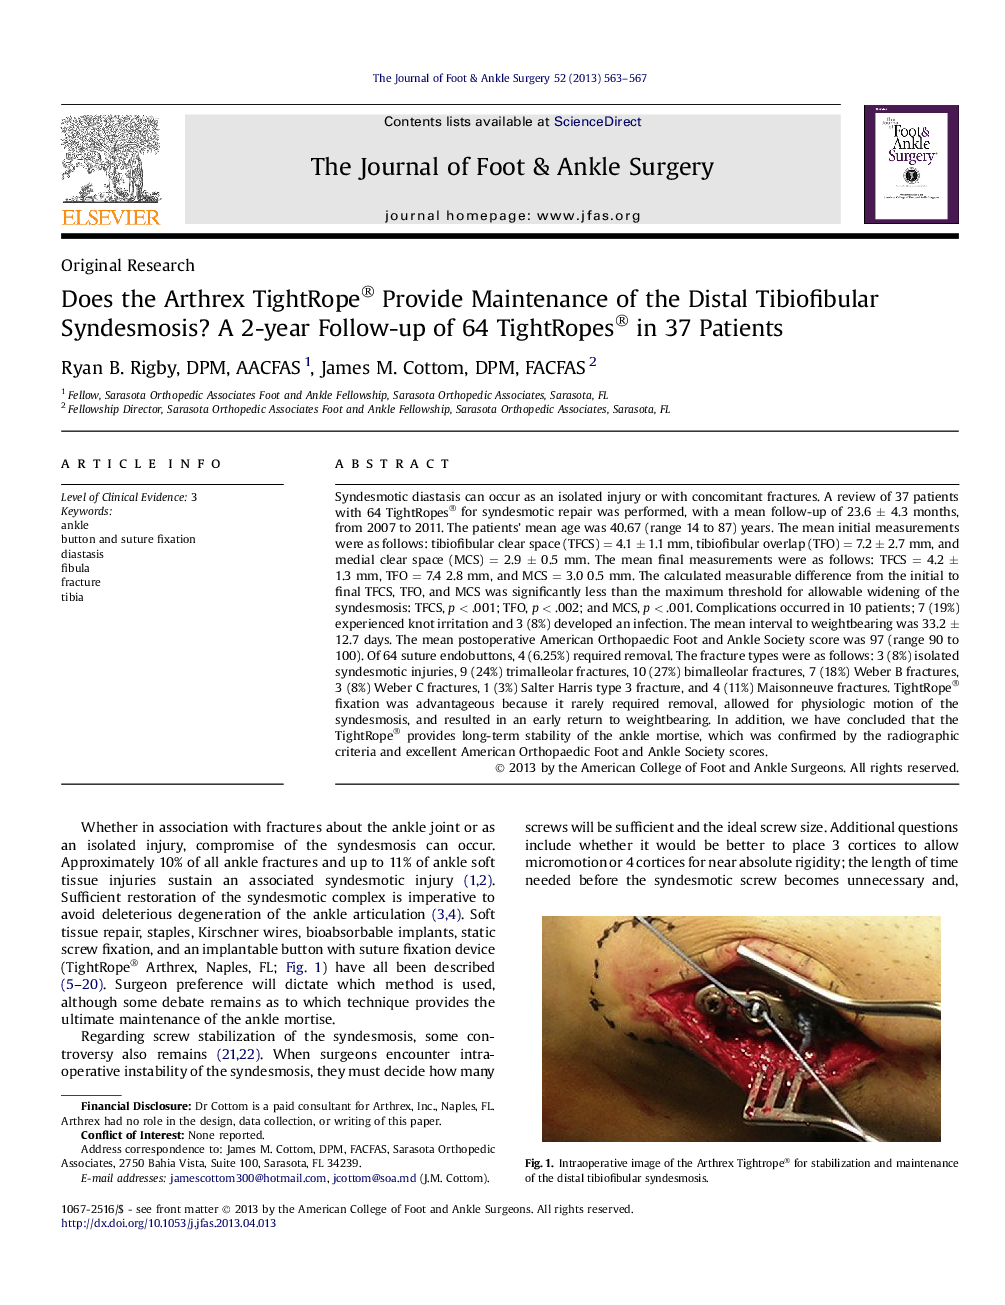 Does the Arthrex TightRope® Provide Maintenance of the Distal Tibiofibular Syndesmosis? A 2-year Follow-up of 64 TightRopes® in 37 Patients 